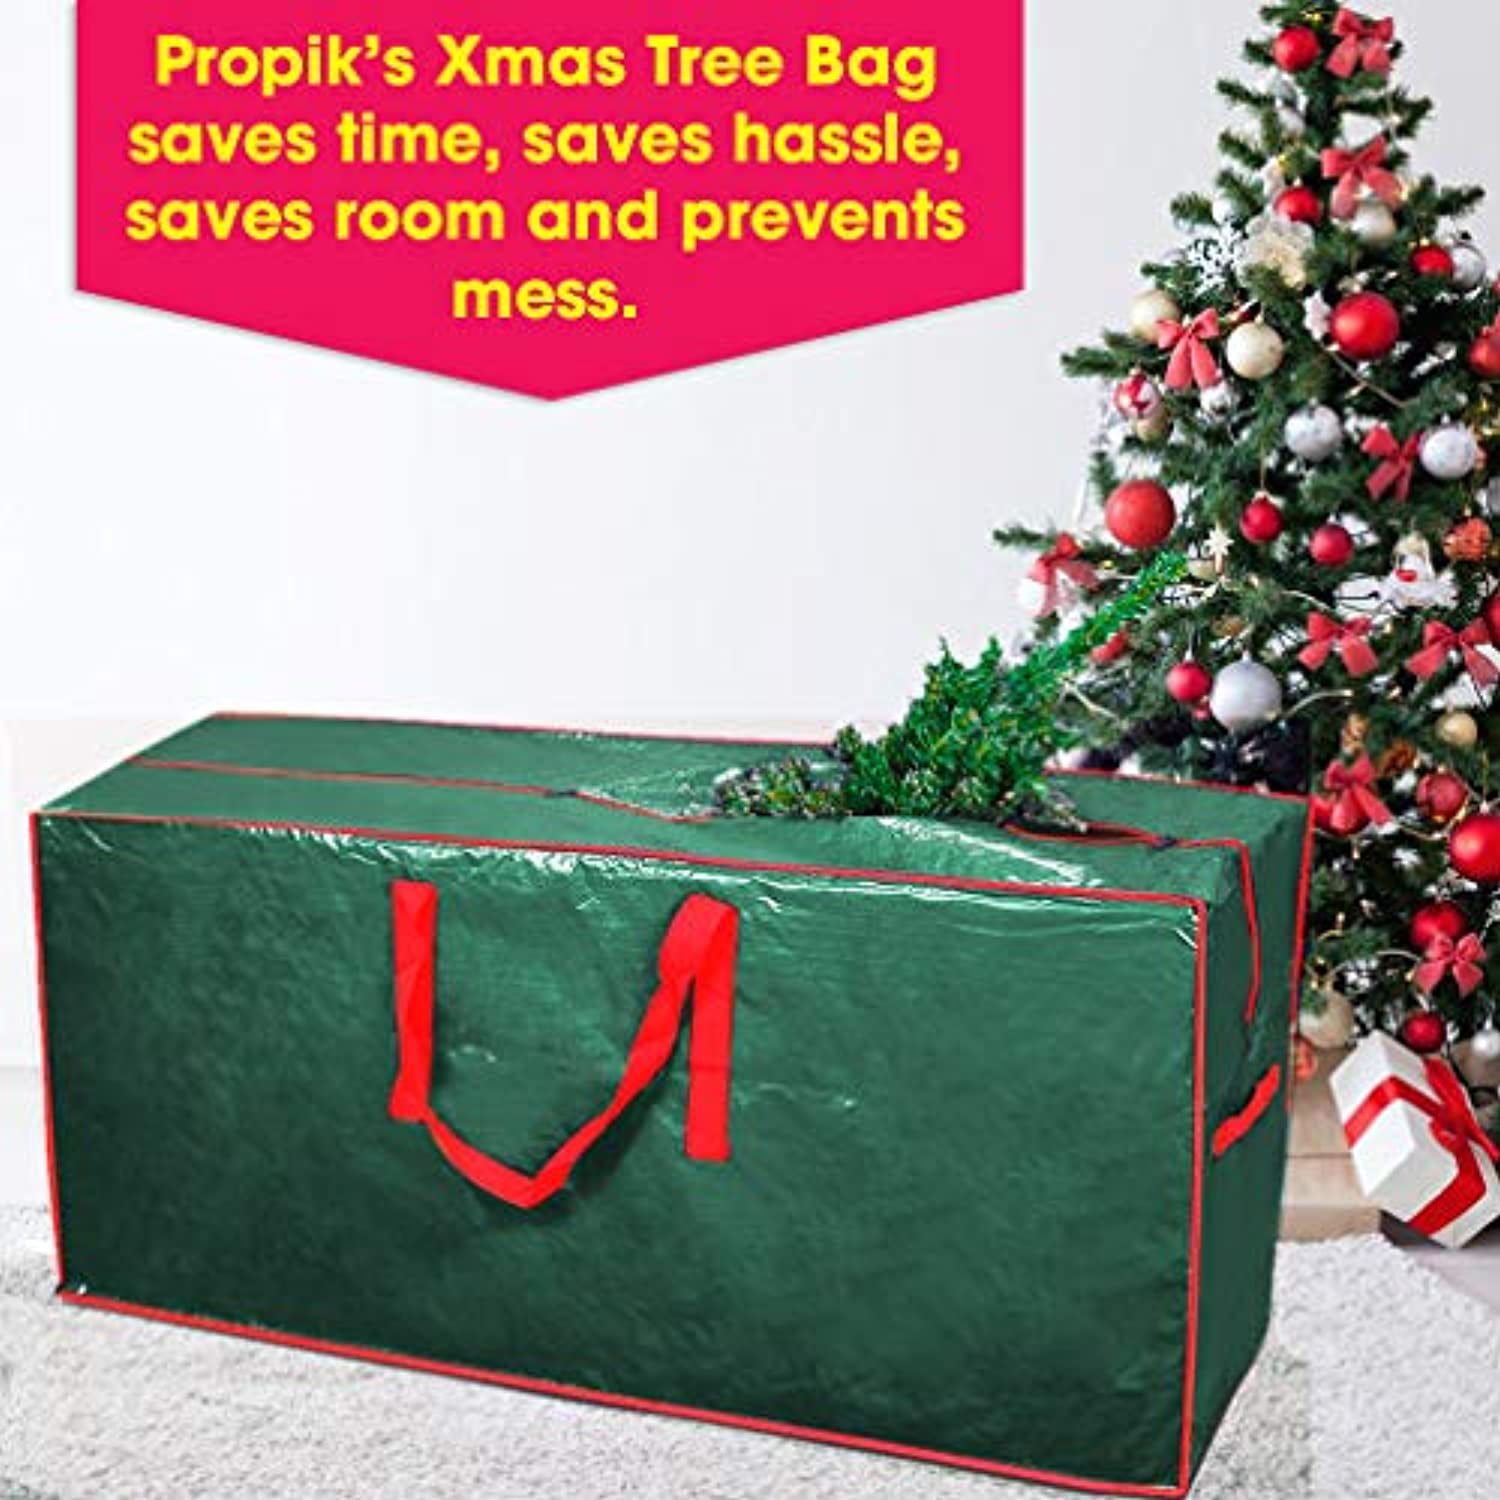 ProPik Artificial Tree Storage Bag Perfect Xmas Storage Container with Handles Green with Sleek Zipper Perfect for Up to 9’ Tall Disassembled Trees 65” X 15” X 30” Holiday Tree Storage Case